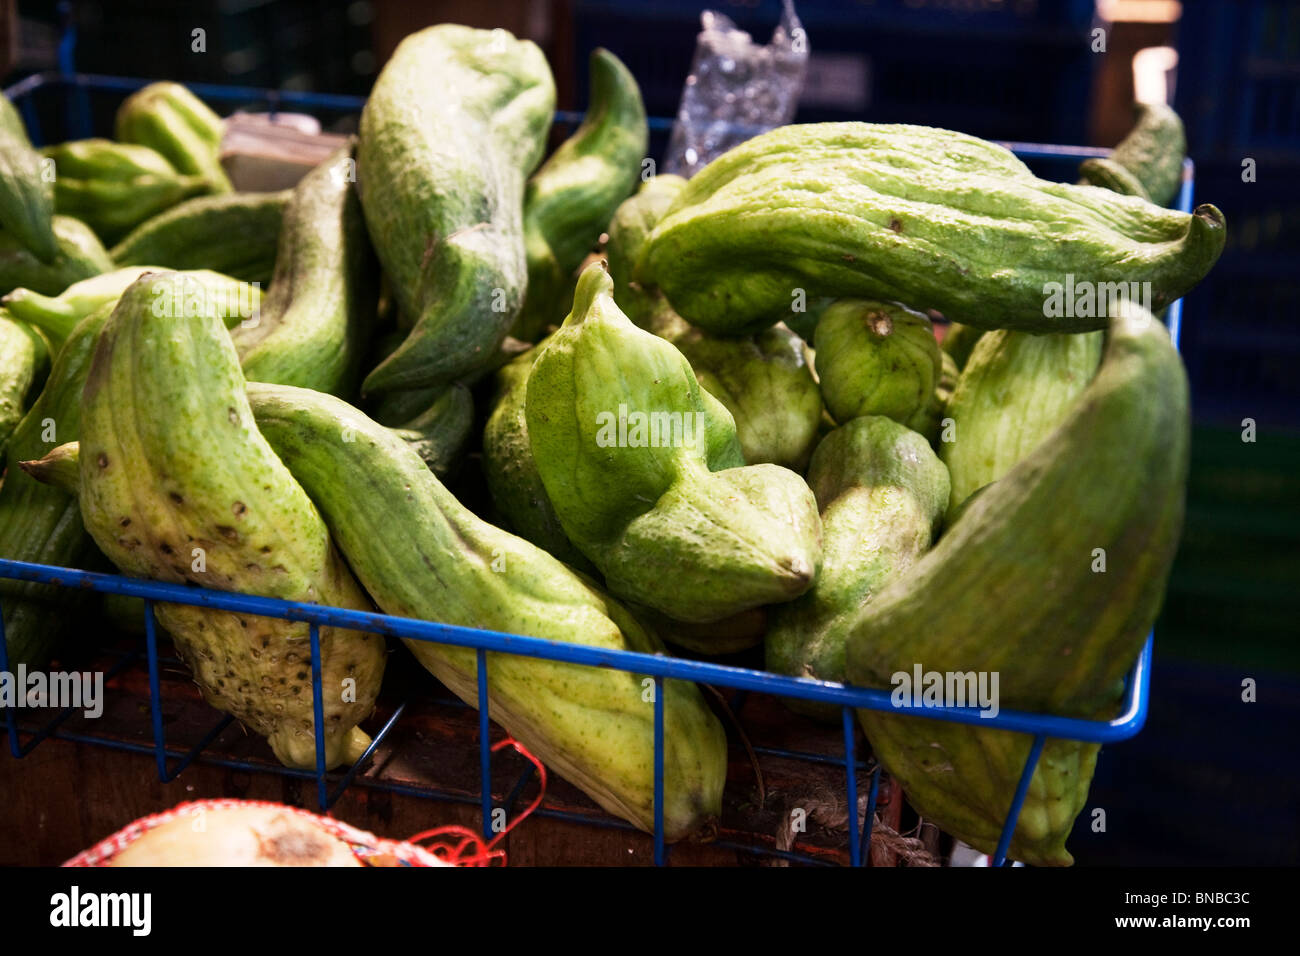 Colombian fruit and vegetable market Stock Photo